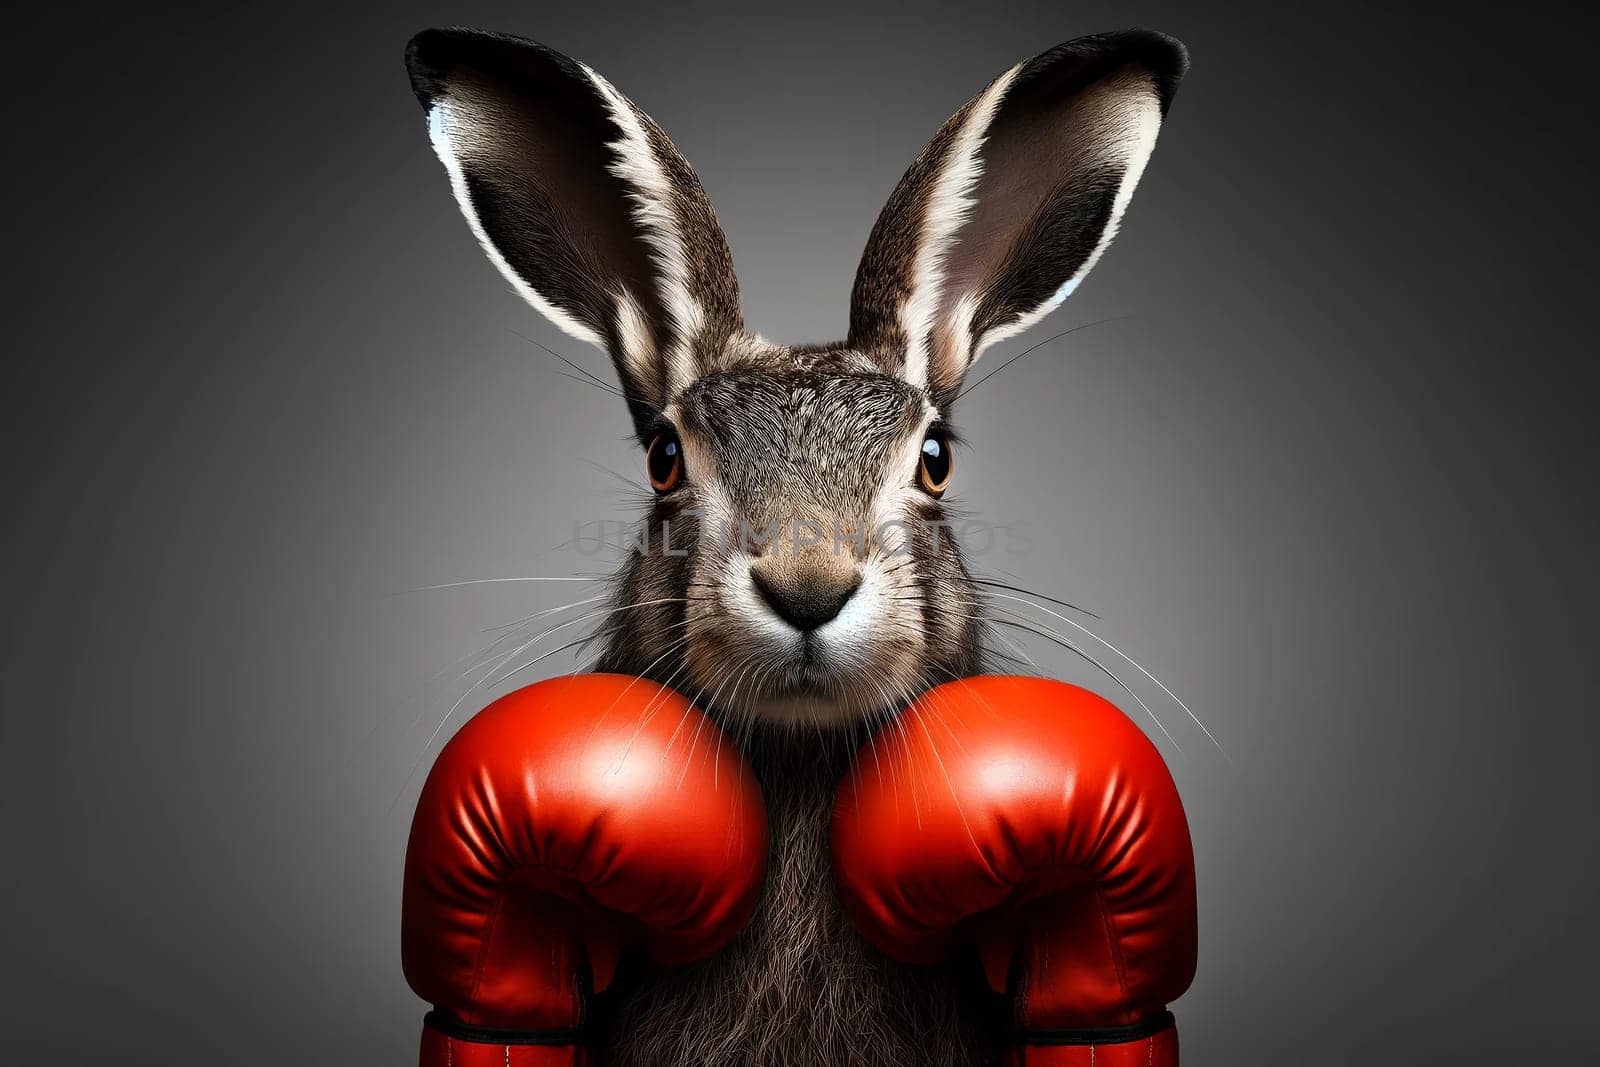 portrait of a hare in boxing gloves on a gray background by Annado